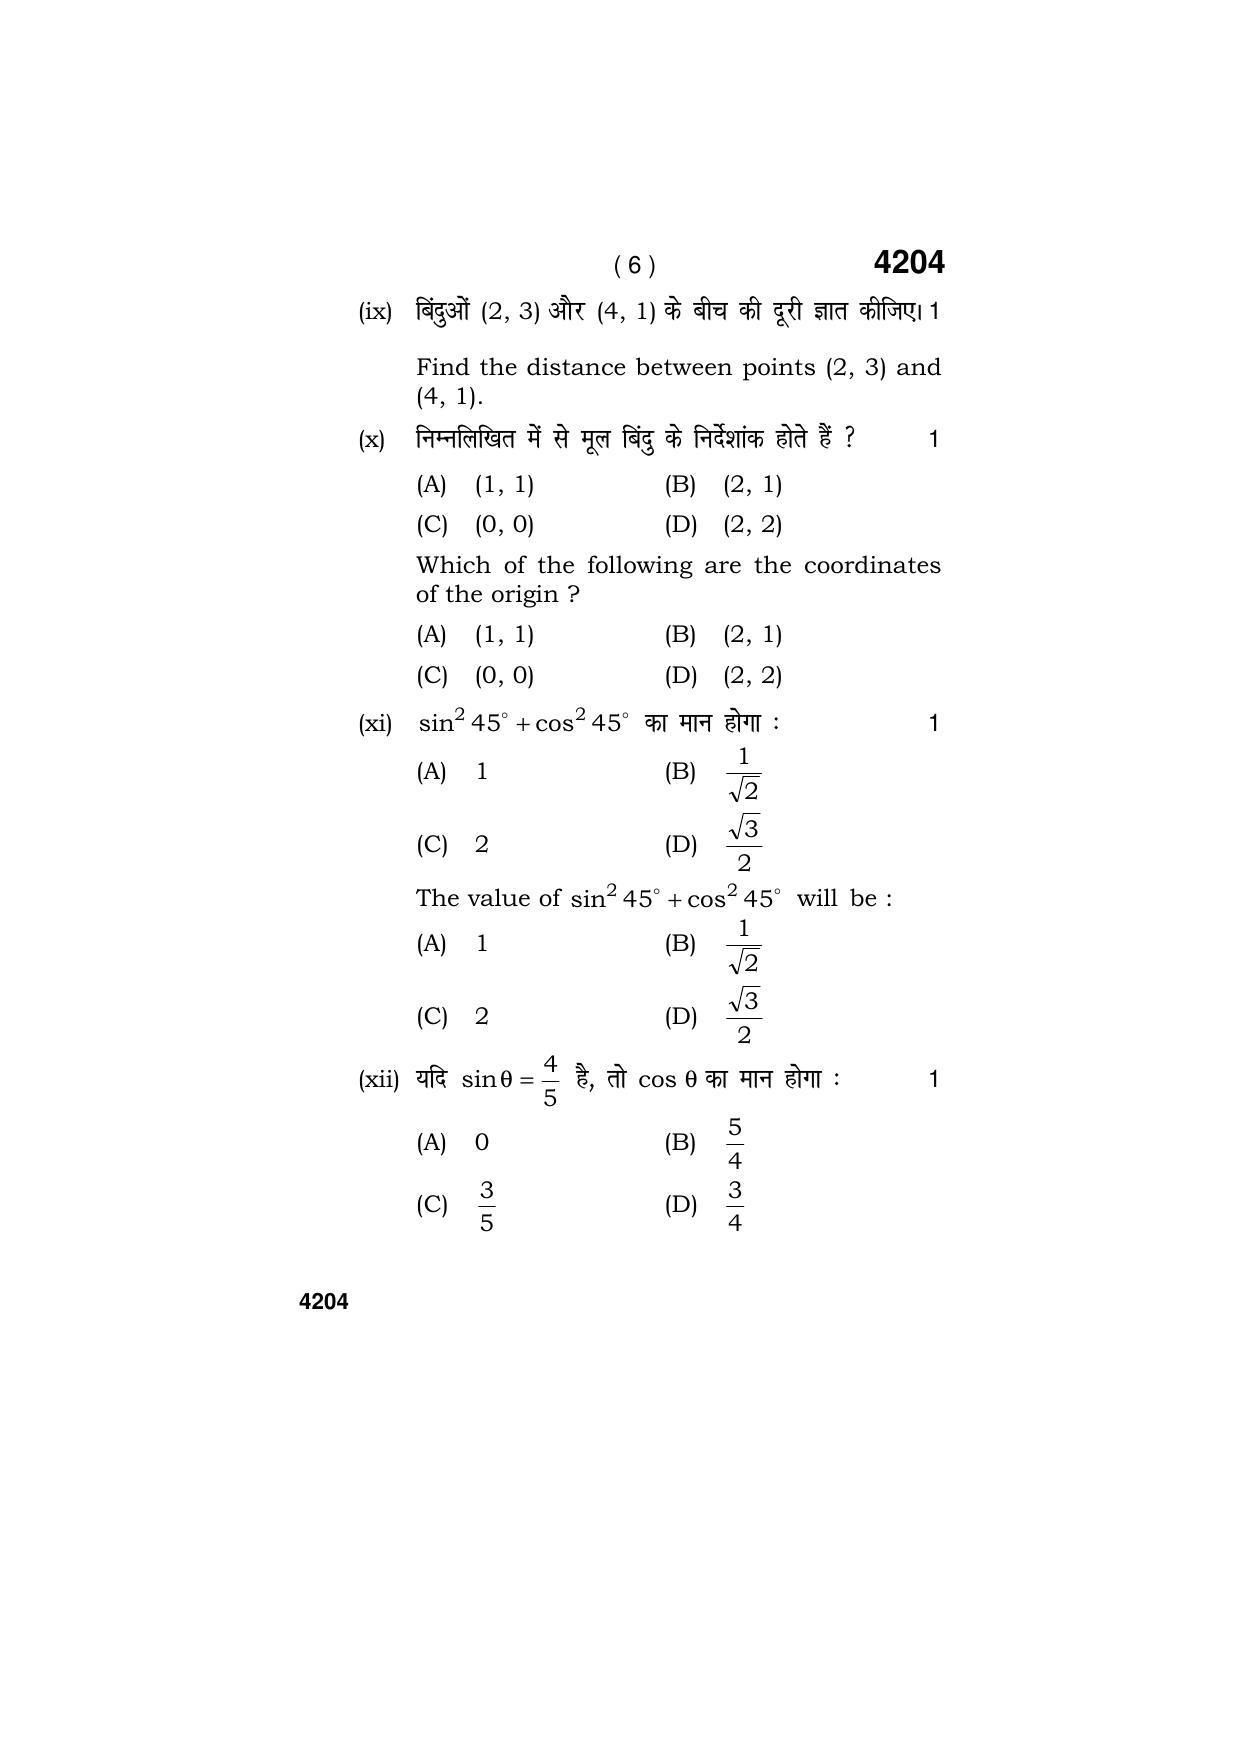 Haryana Board HBSE Class 10 Mathematics (Blind c) 2019 Question Paper - Page 6